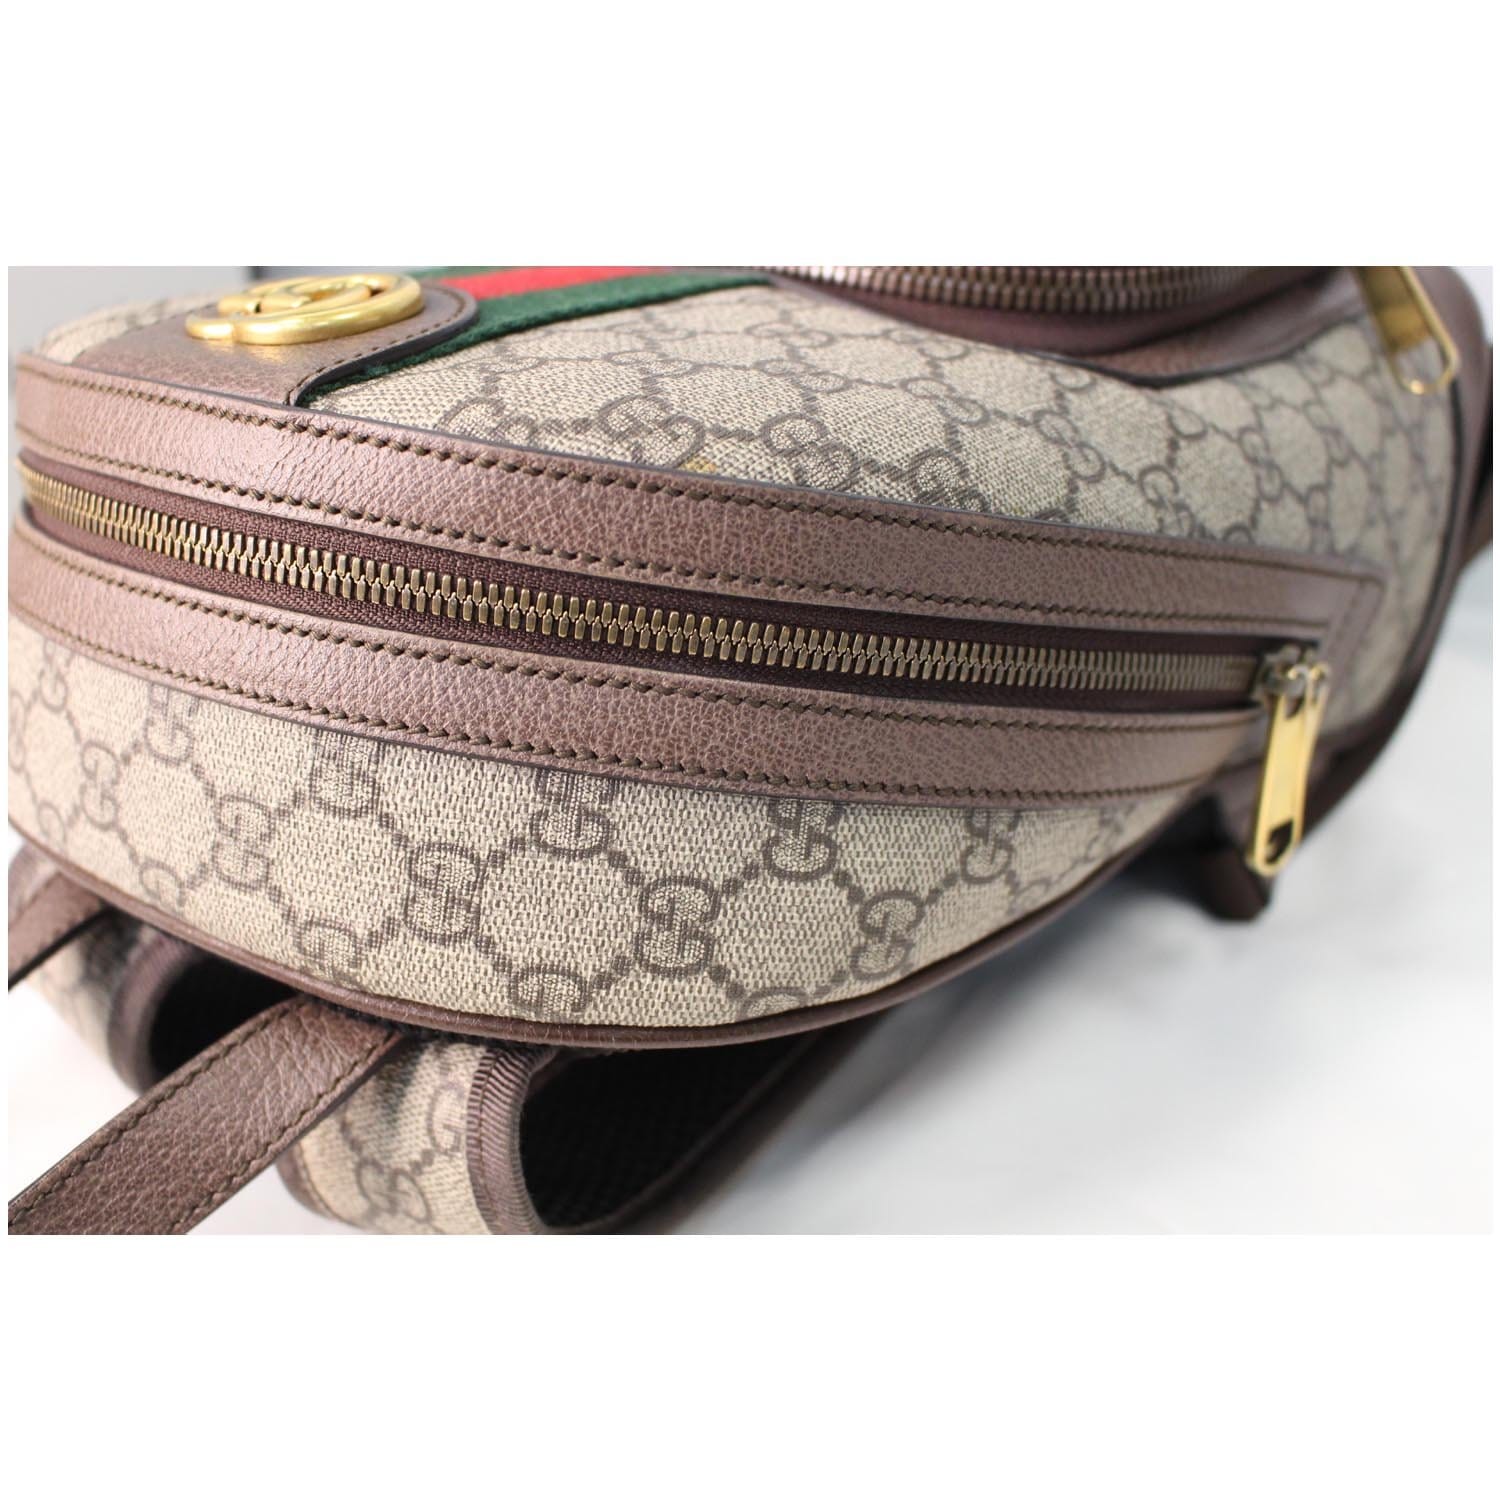 GUCCI: Ophidia GG mini bag with Web band - Beige